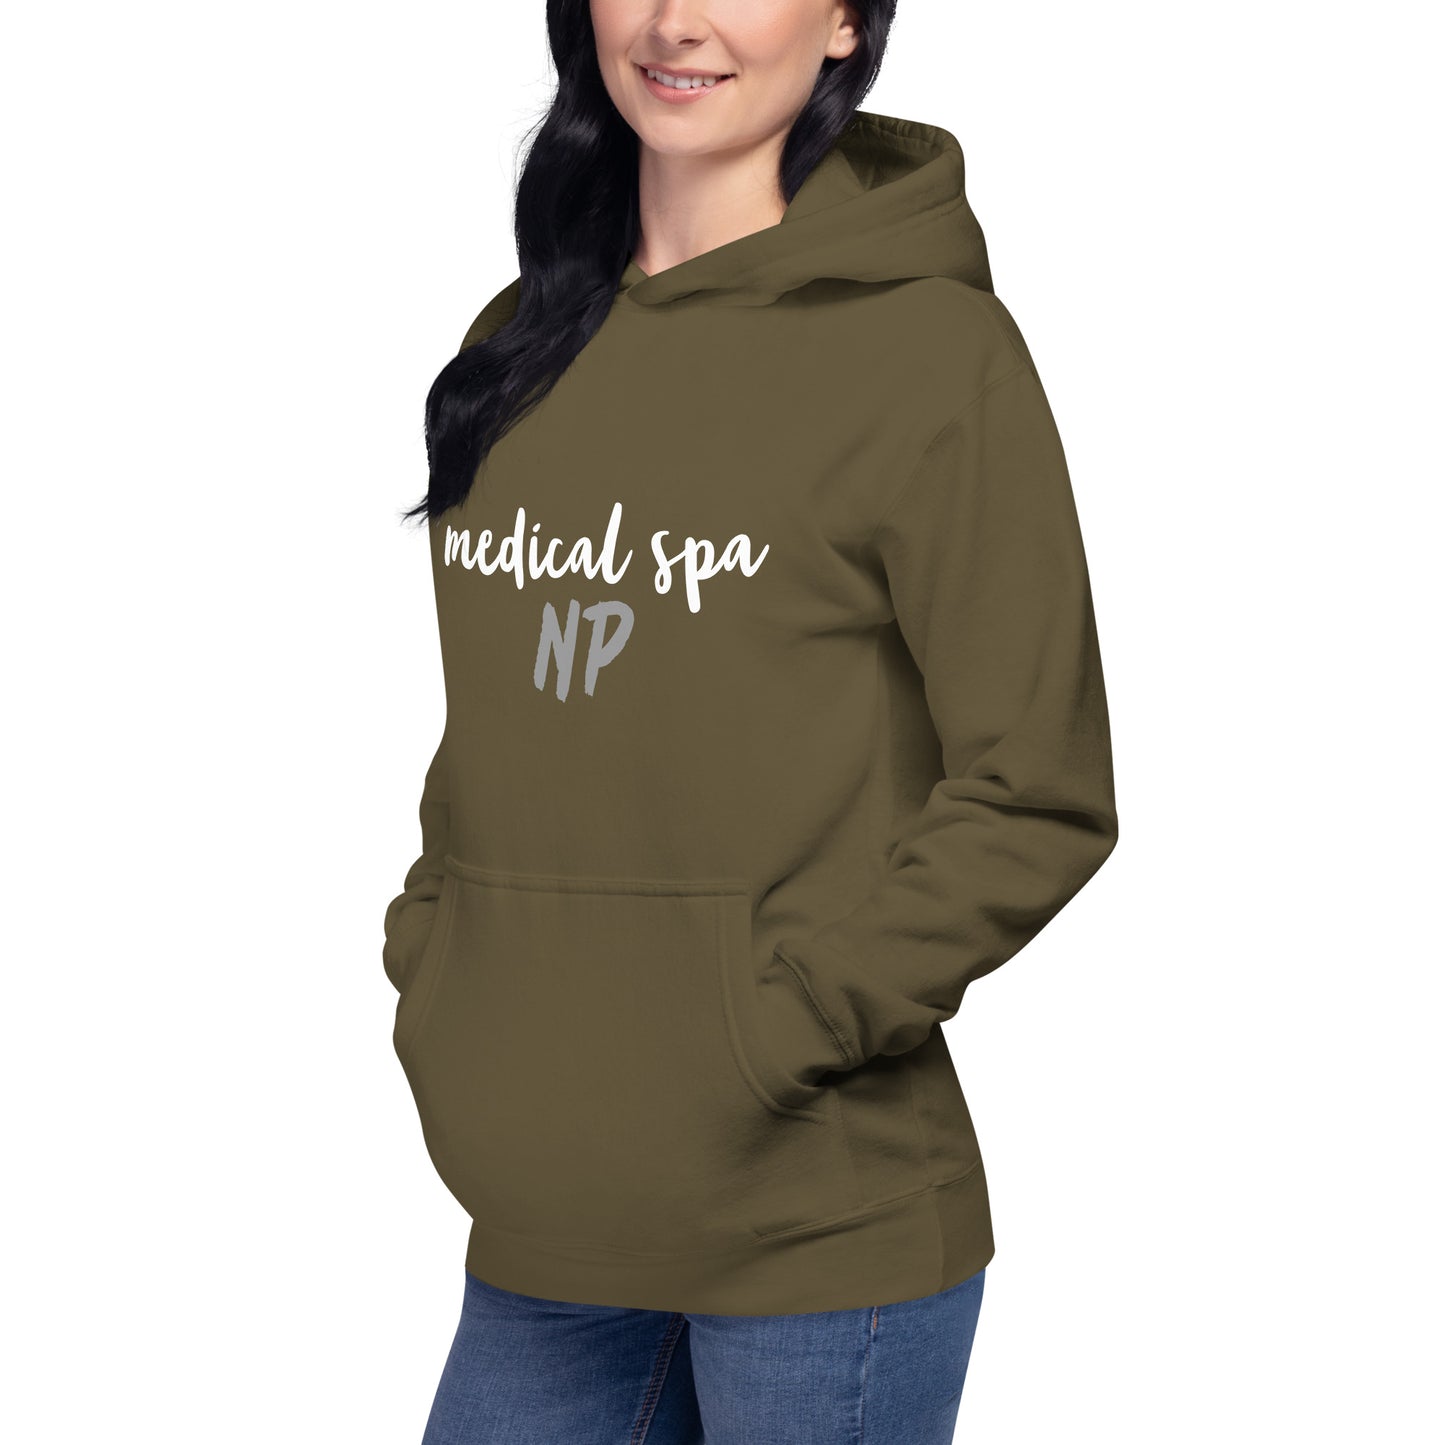 Unisex Hoodie-MSNP in script- a must have for all!